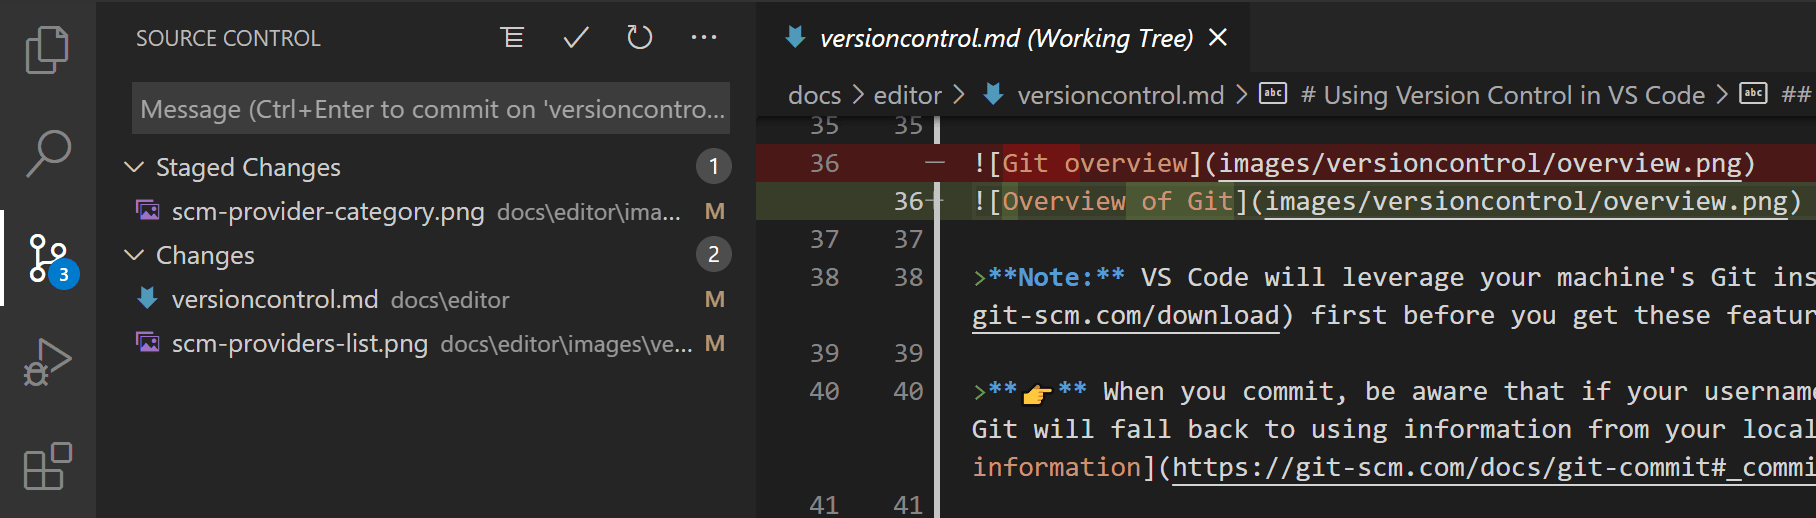 Overview of Git